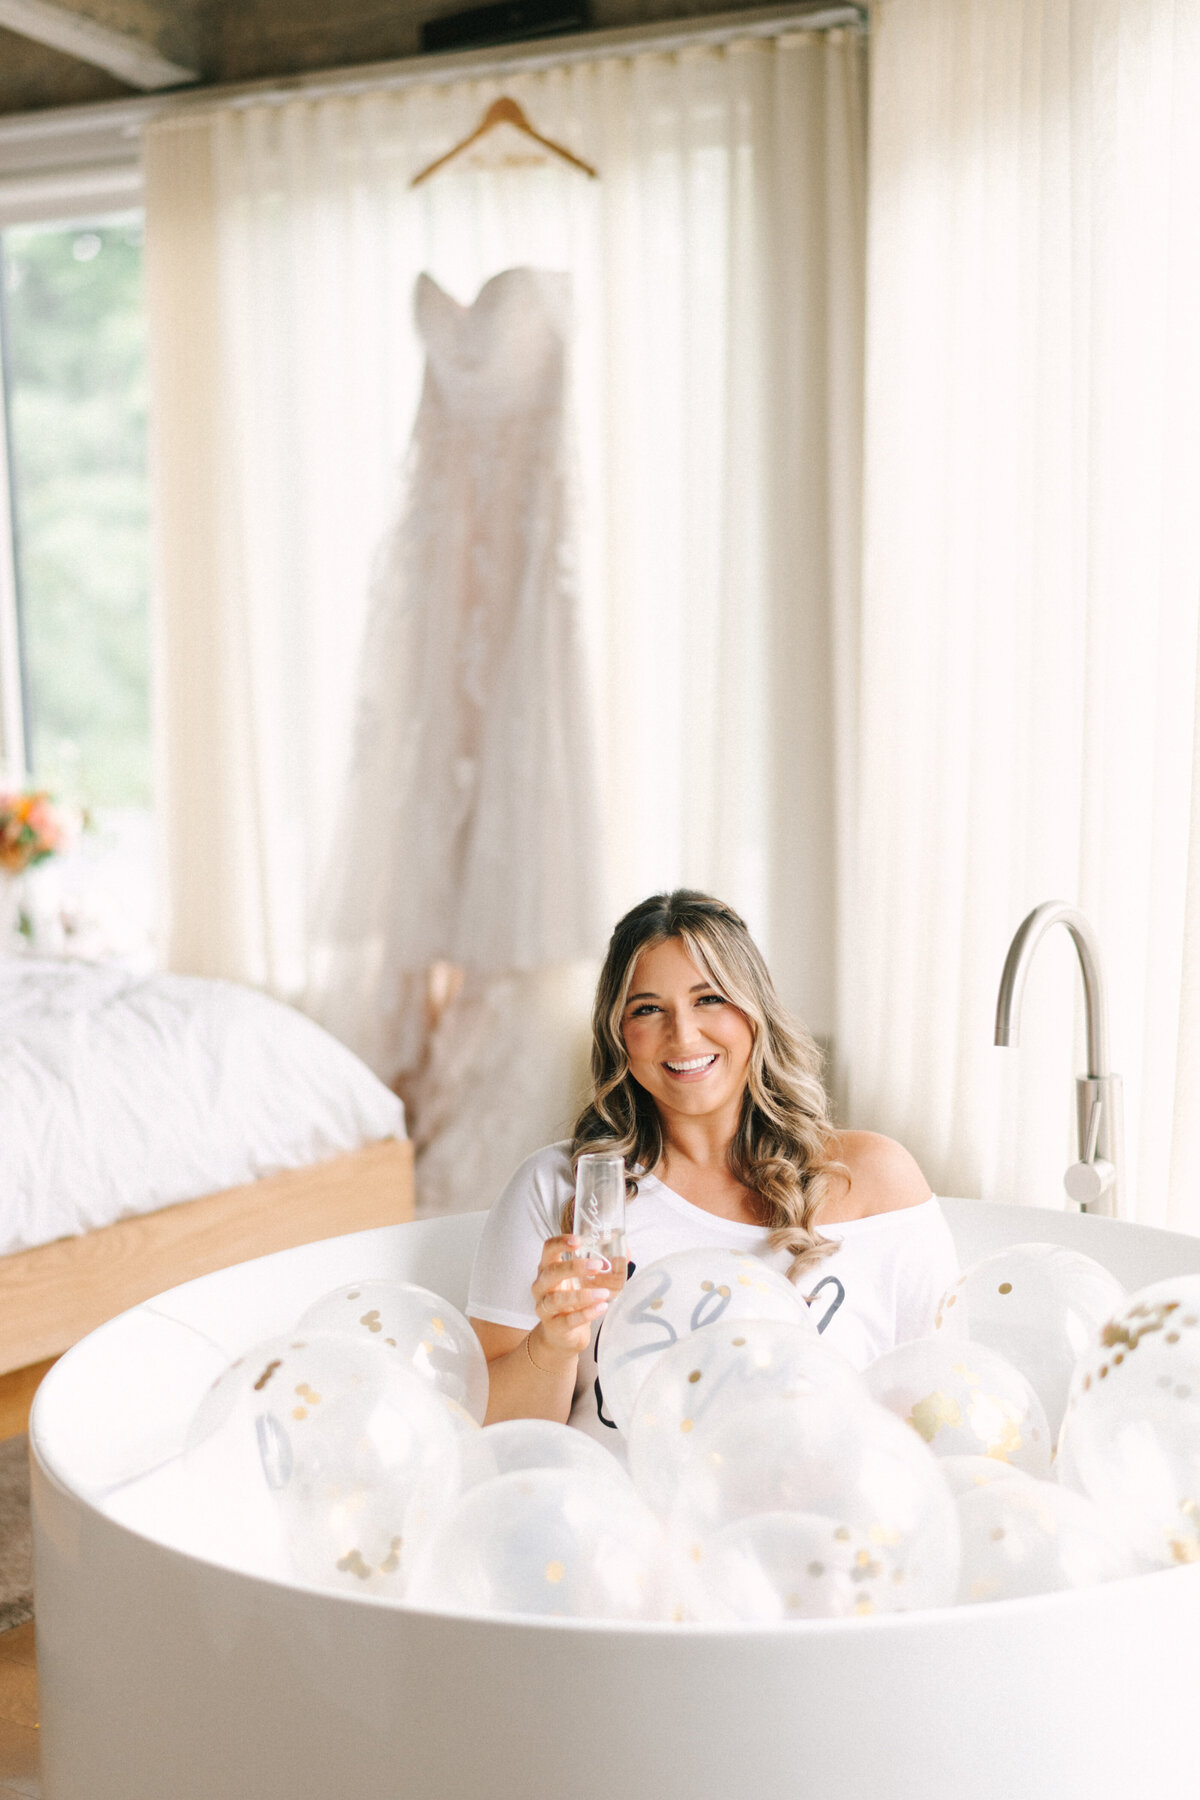 bride relaxing in tub before getting wedding dress on